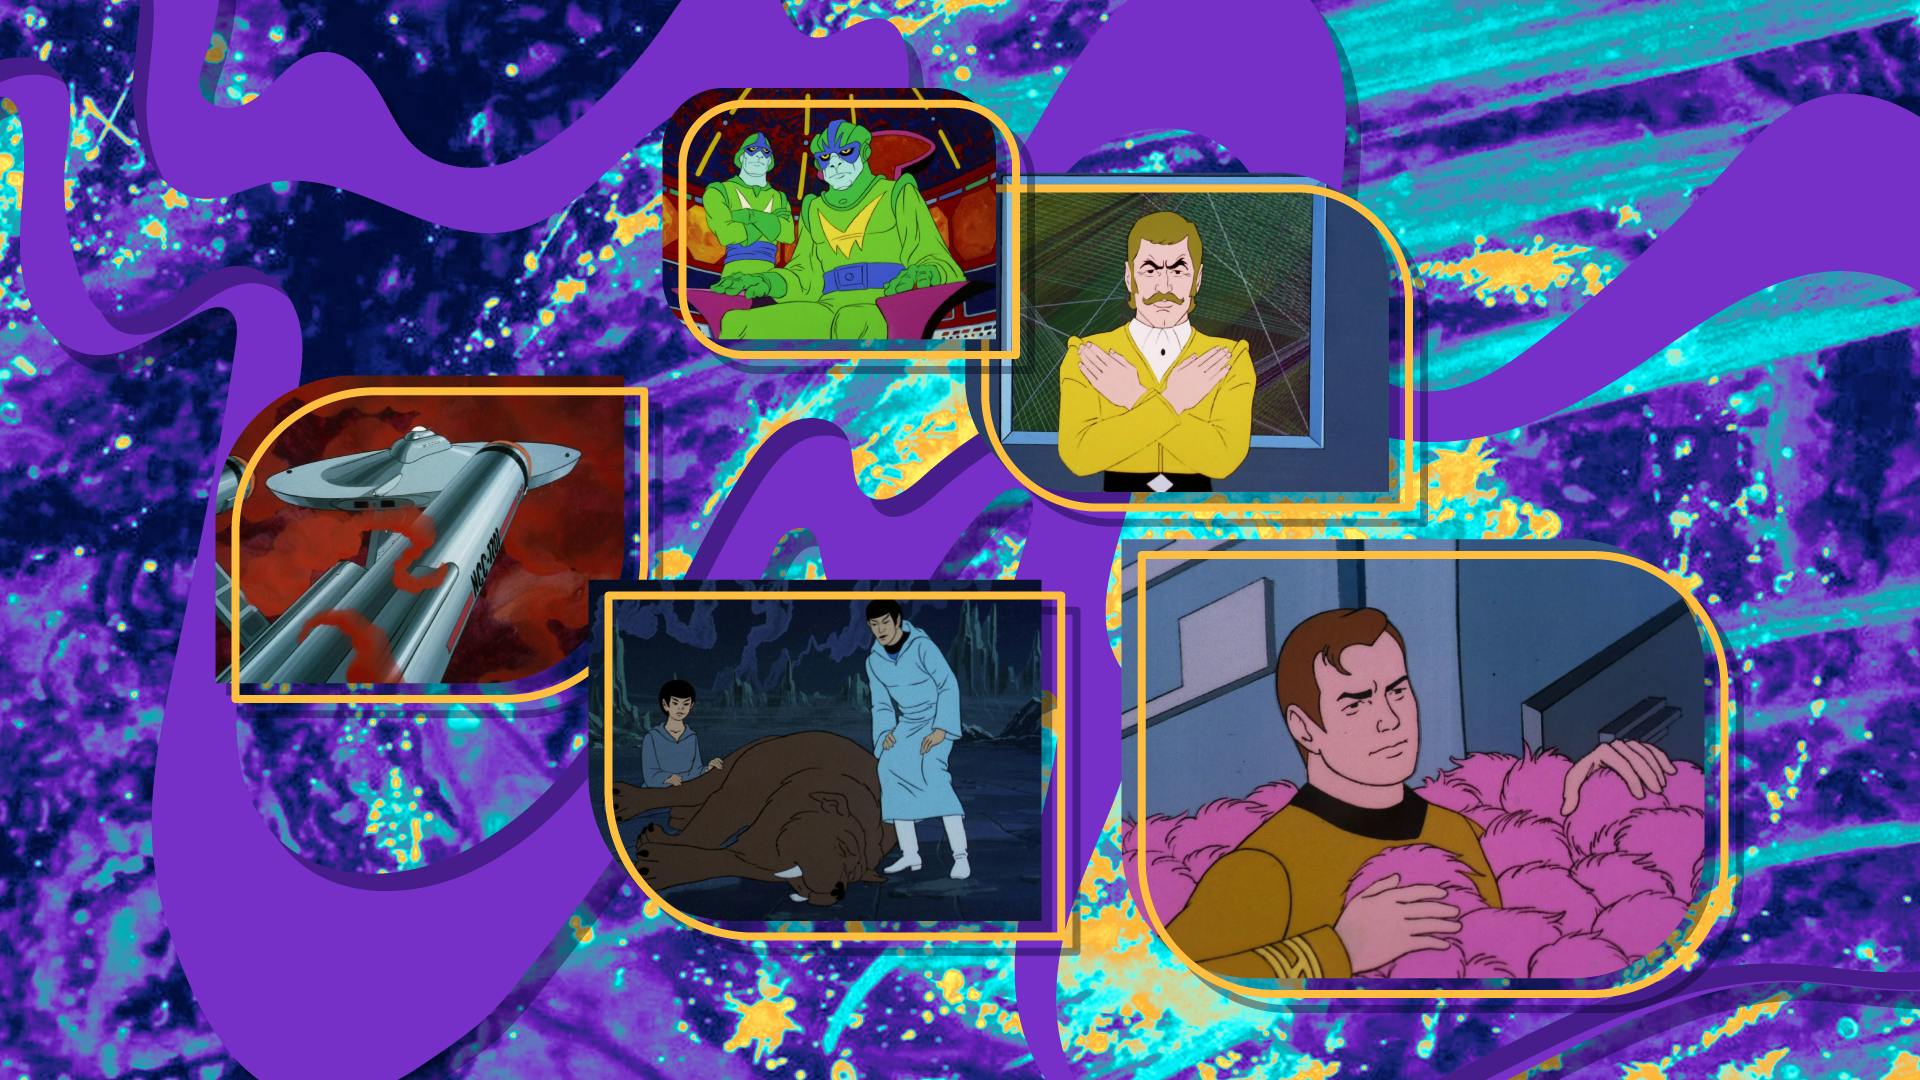 Textured illustrative background featuring a collage of episodic stills from Star Trek: The Animated Series